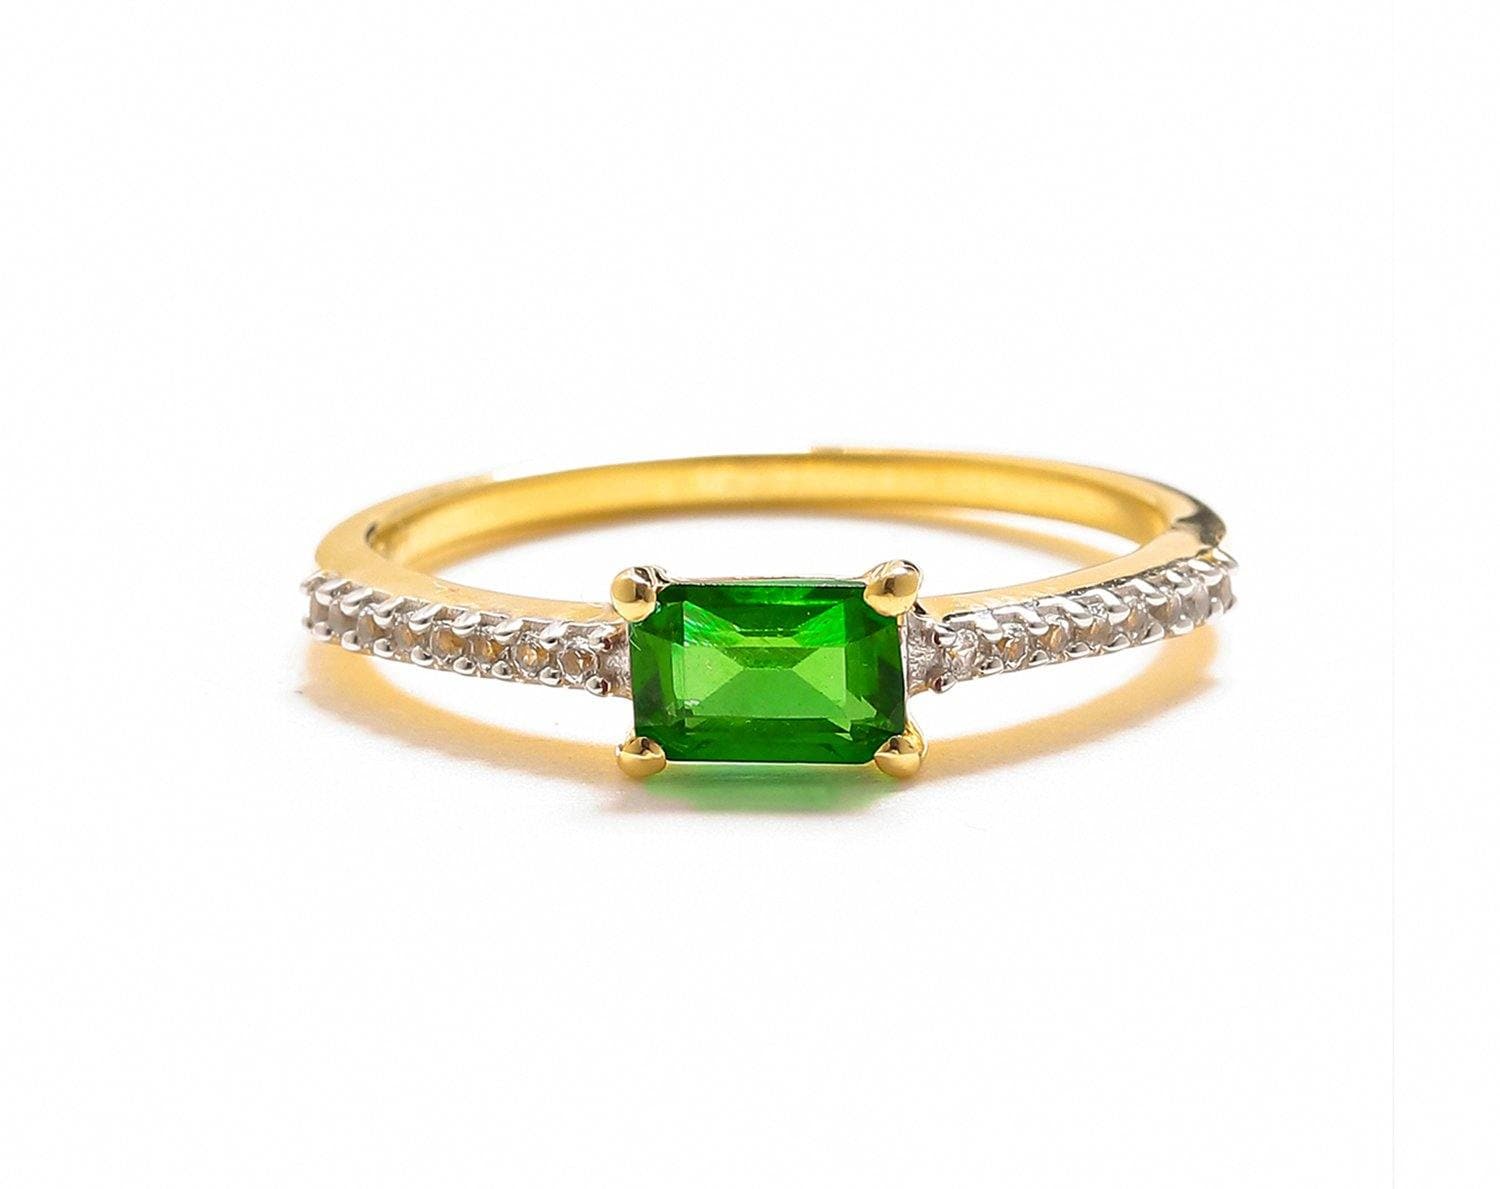 0.68 Ct Chrome Diopside Solid 10k Yellow Gold Ring Jewelry - YoTreasure